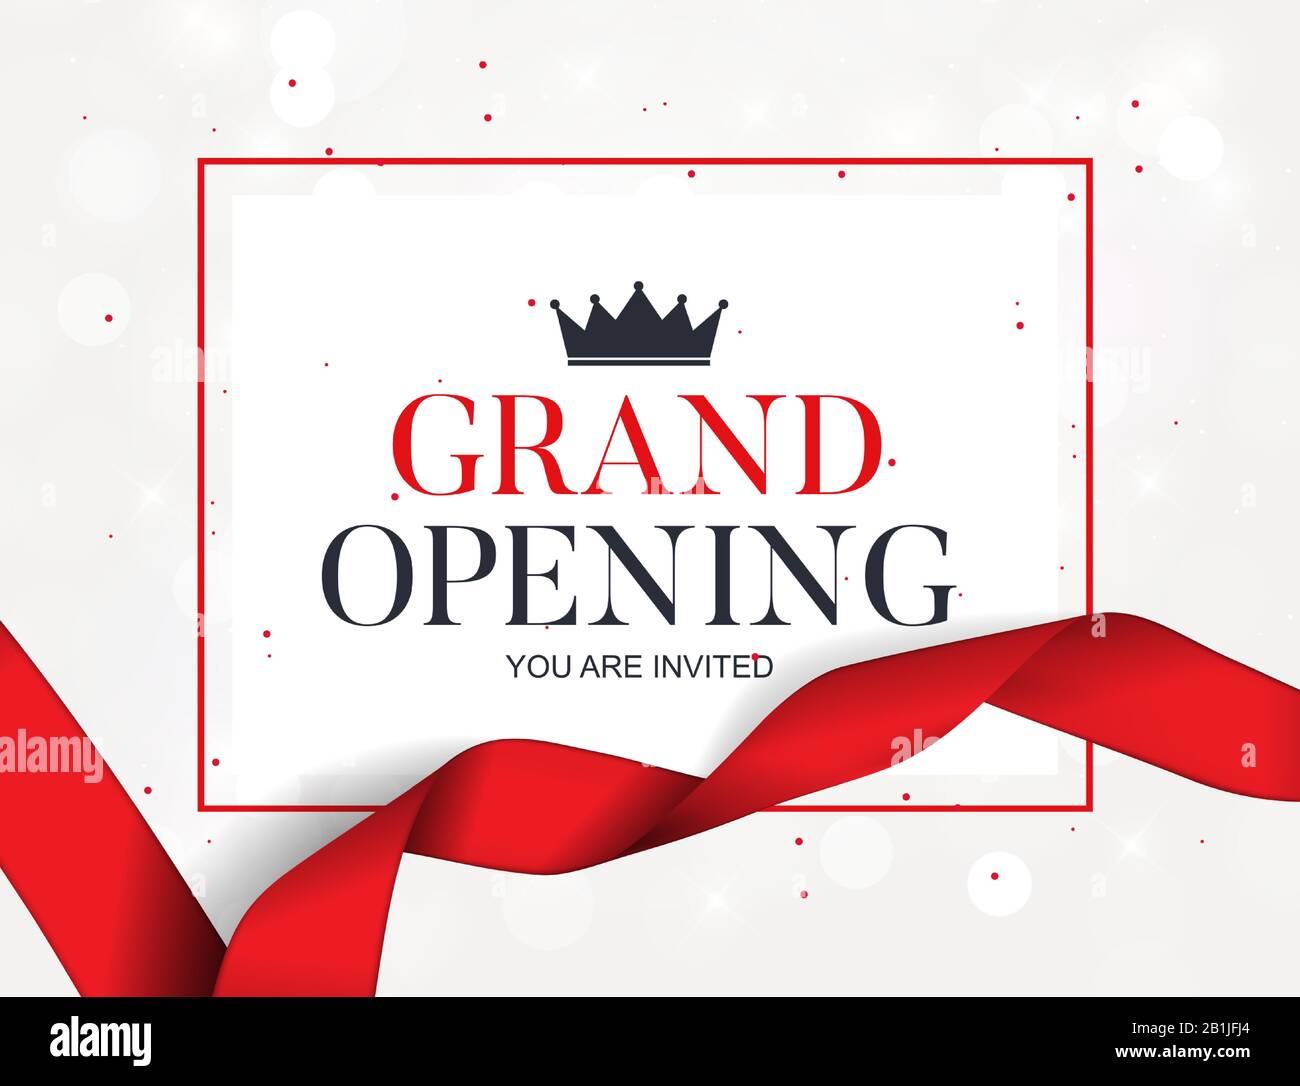 Grand opening background with red ribbon Vector Image